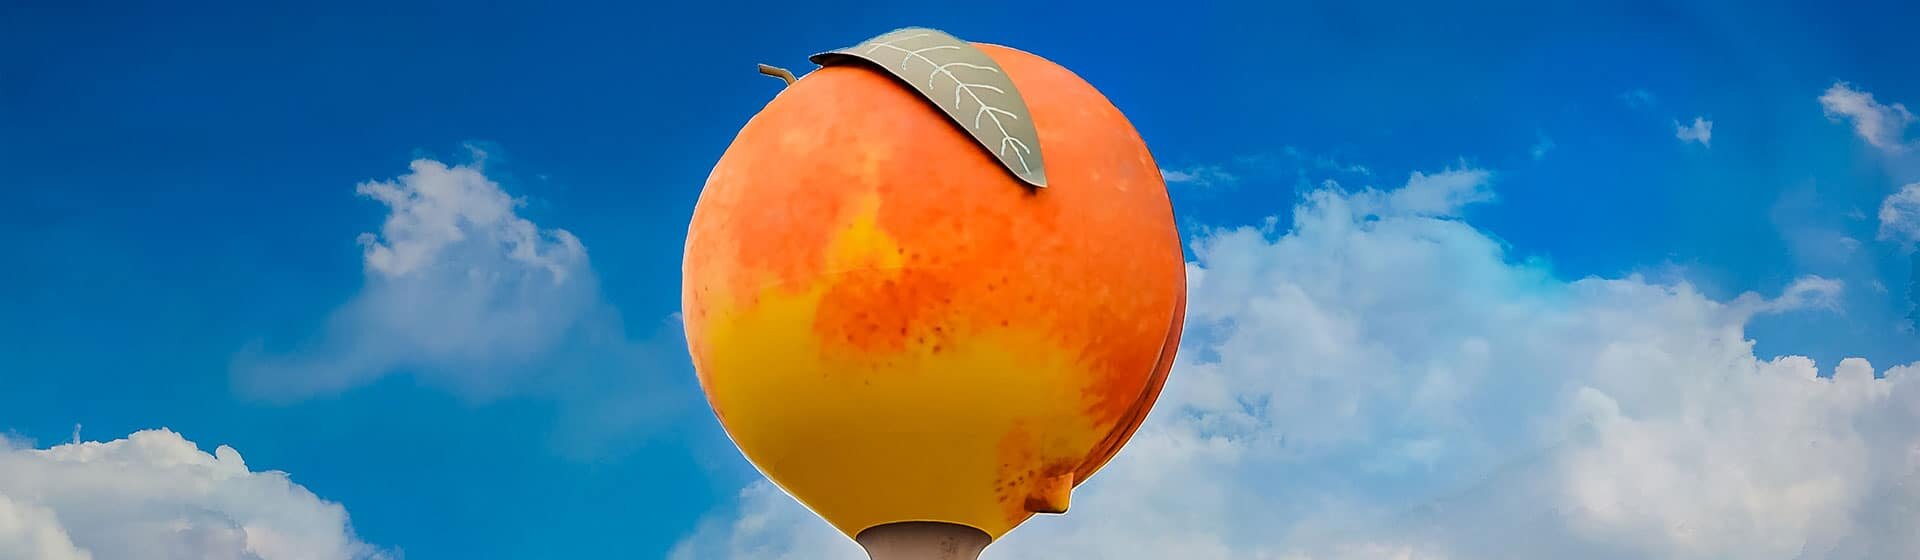 A water tower decorated and painted to look like a giant peach.